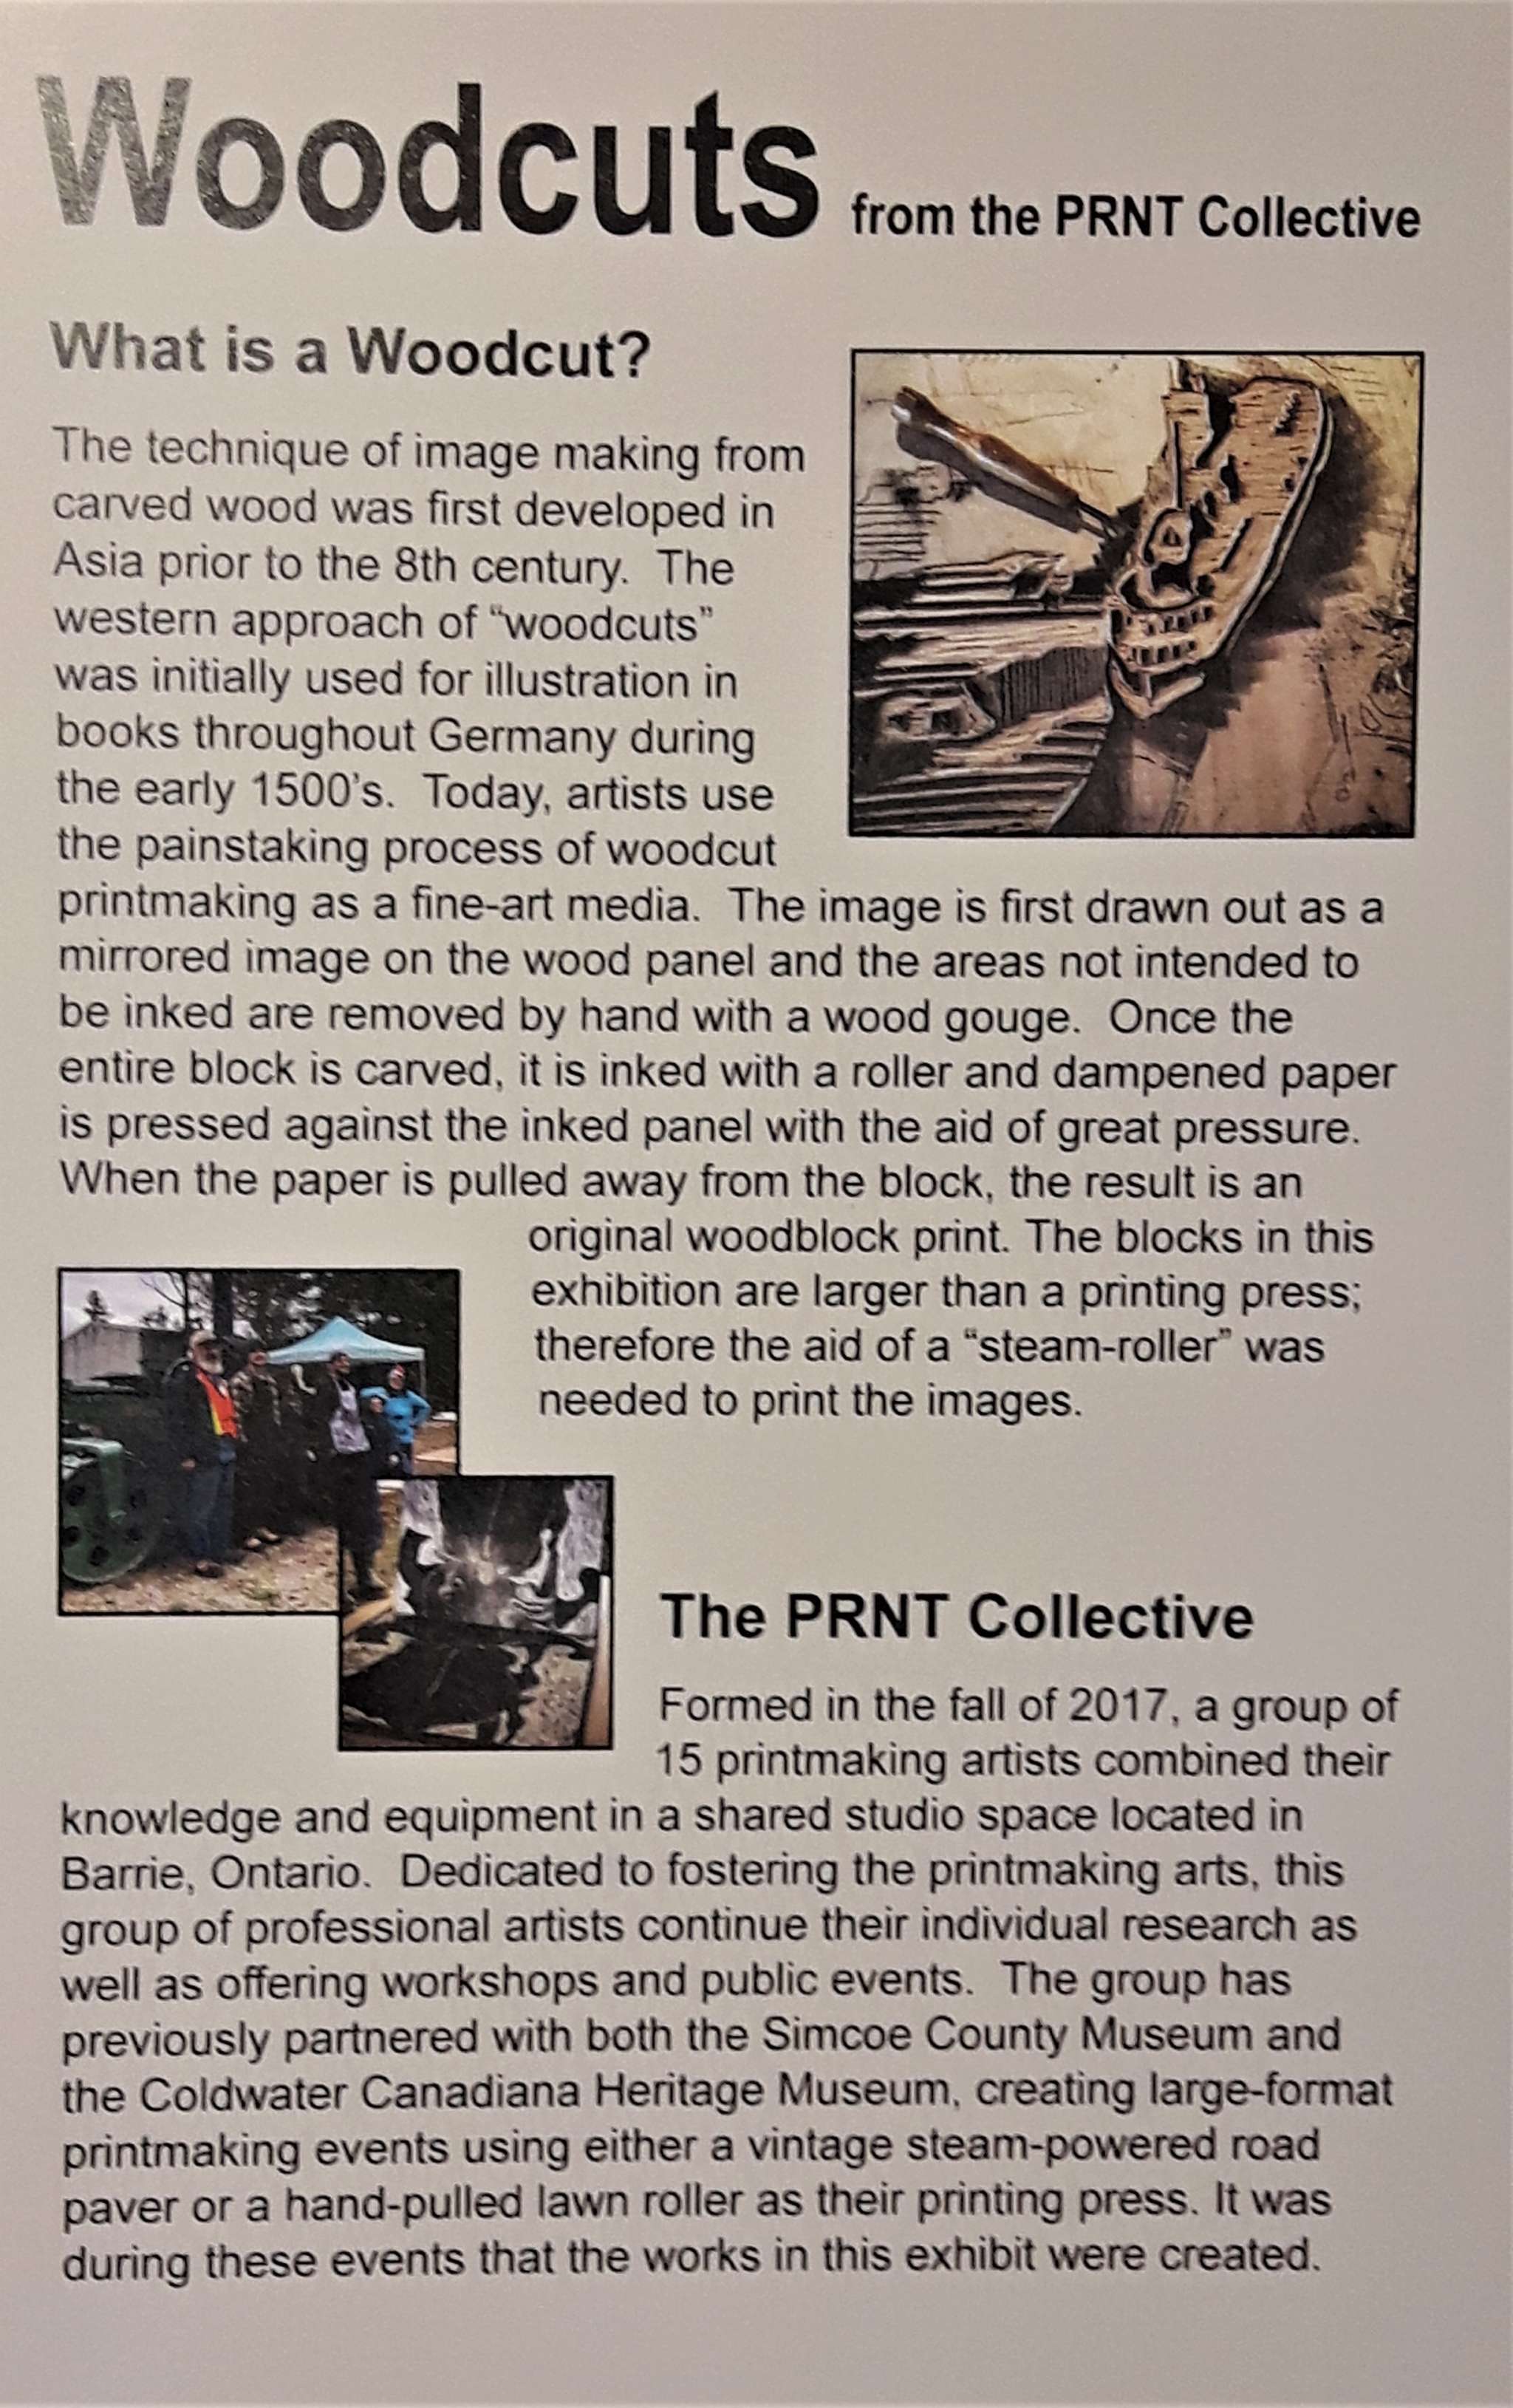 The PRNT Collective